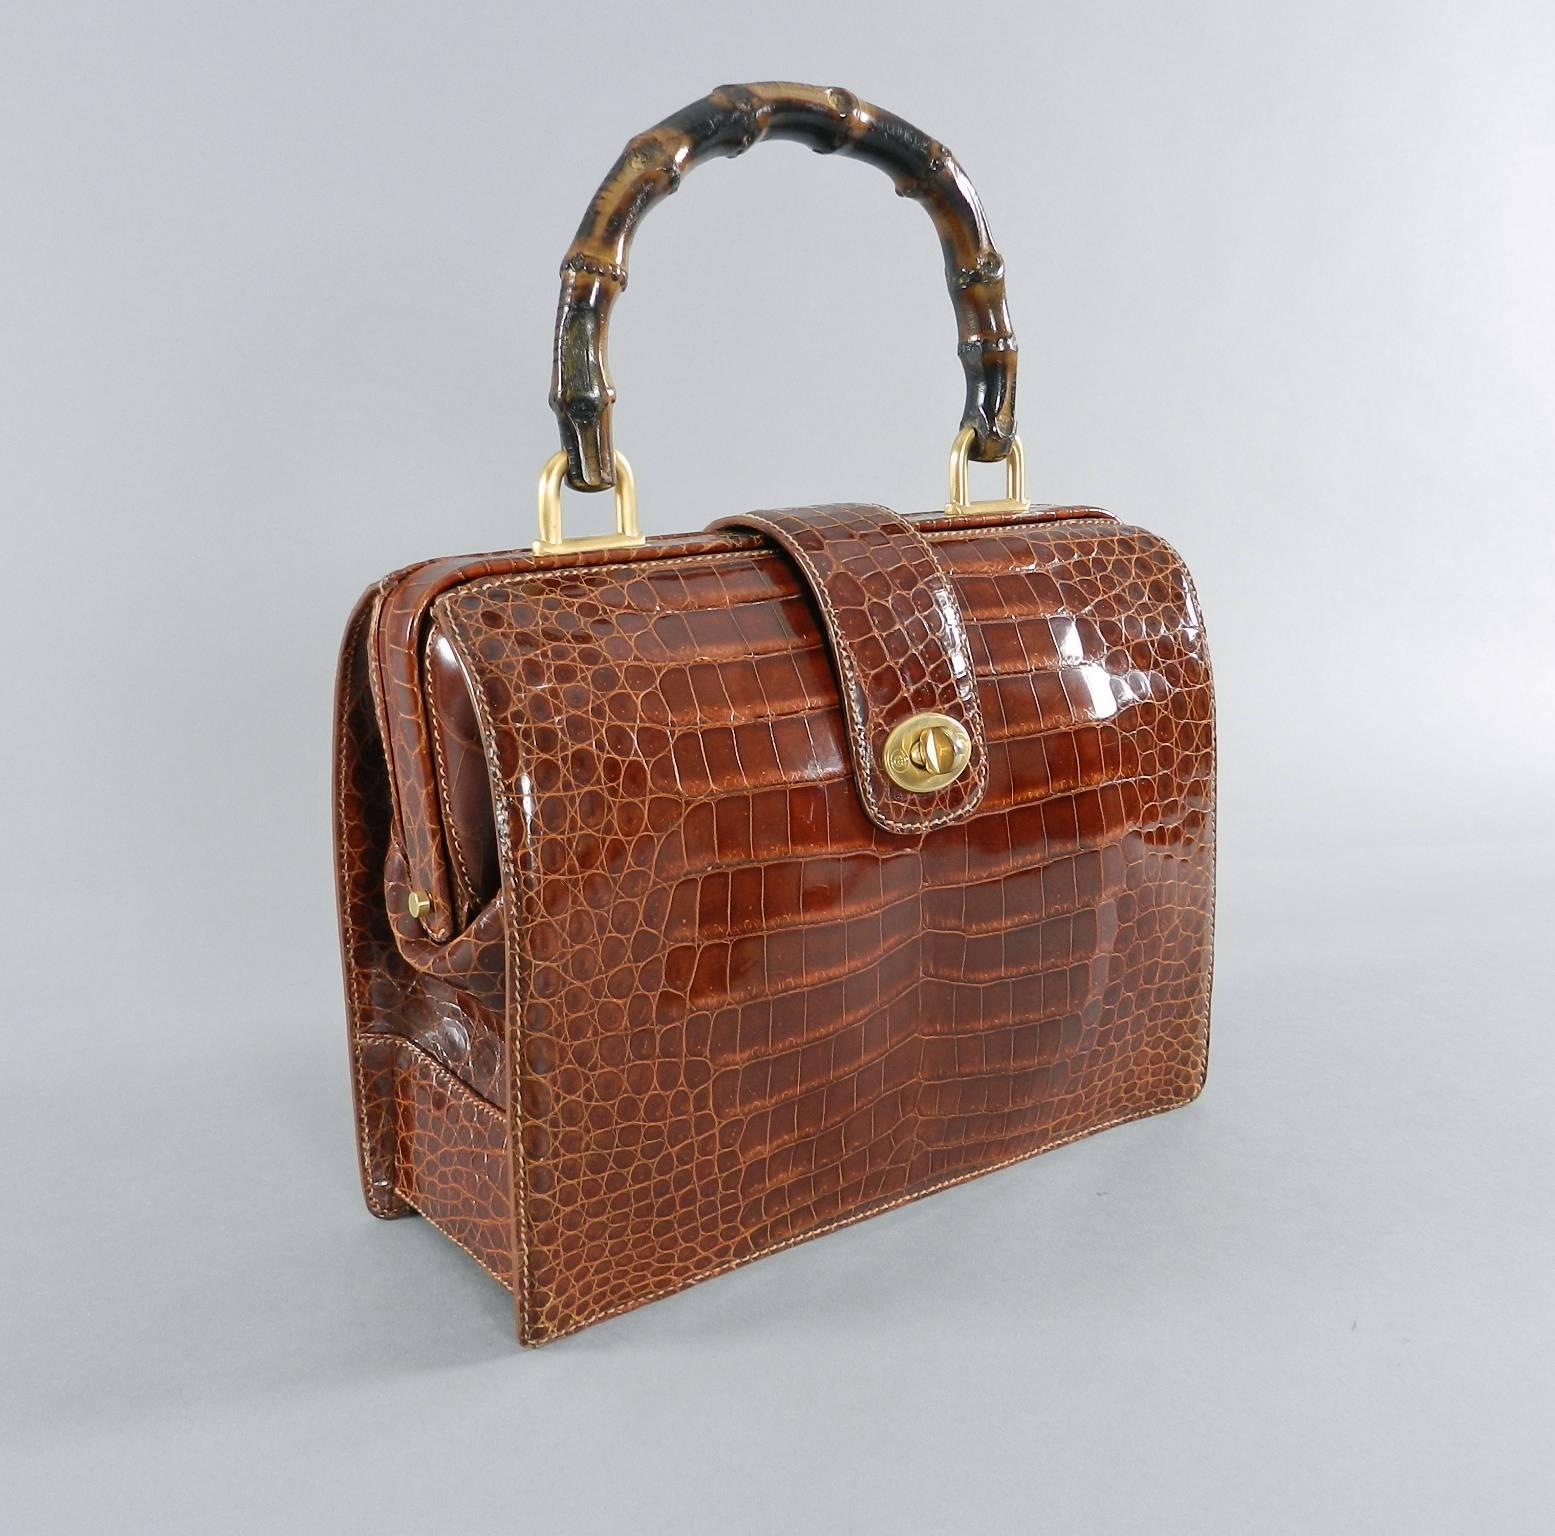 Gucci vintage cognac crocodile doctor bag with bamboo handle. Circa late 1990's. Suede lined, matte goldtone hardware, fastens with turnclasp, and has hinged frame.  Body of purse measures 10.5 x 8 x 3.75 inches not including handle. Excellent